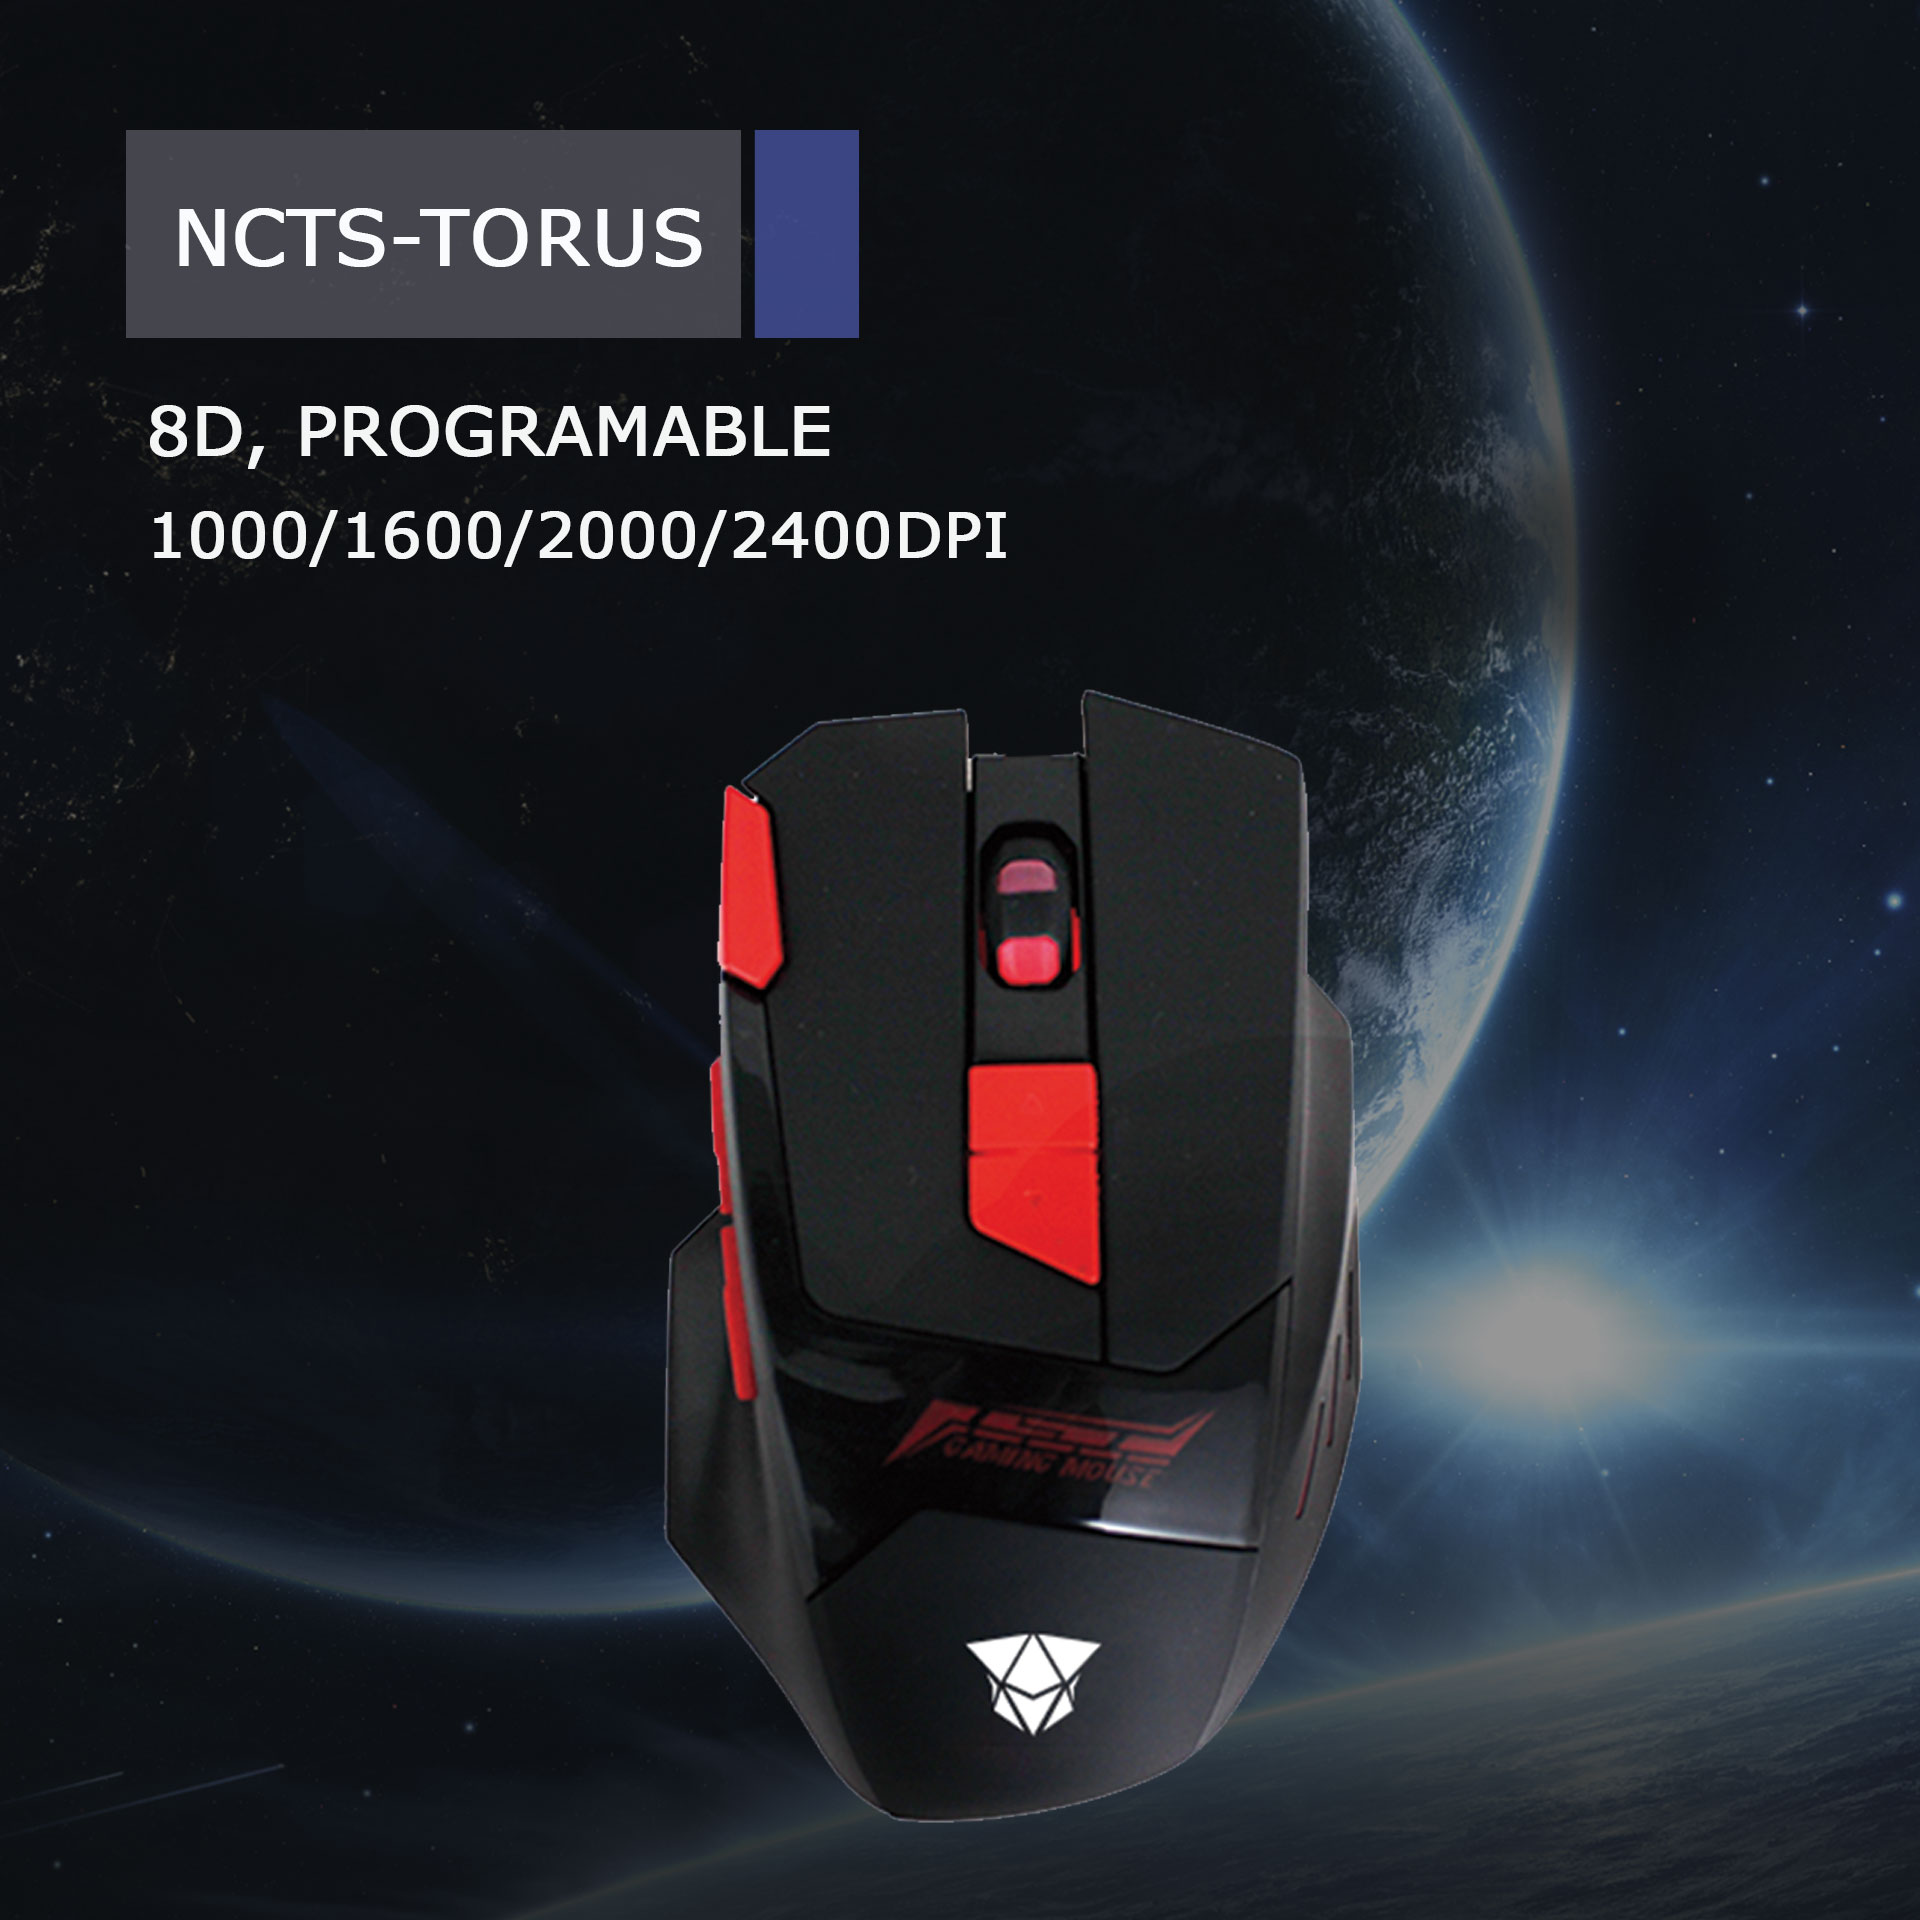 NCTS-TORUS